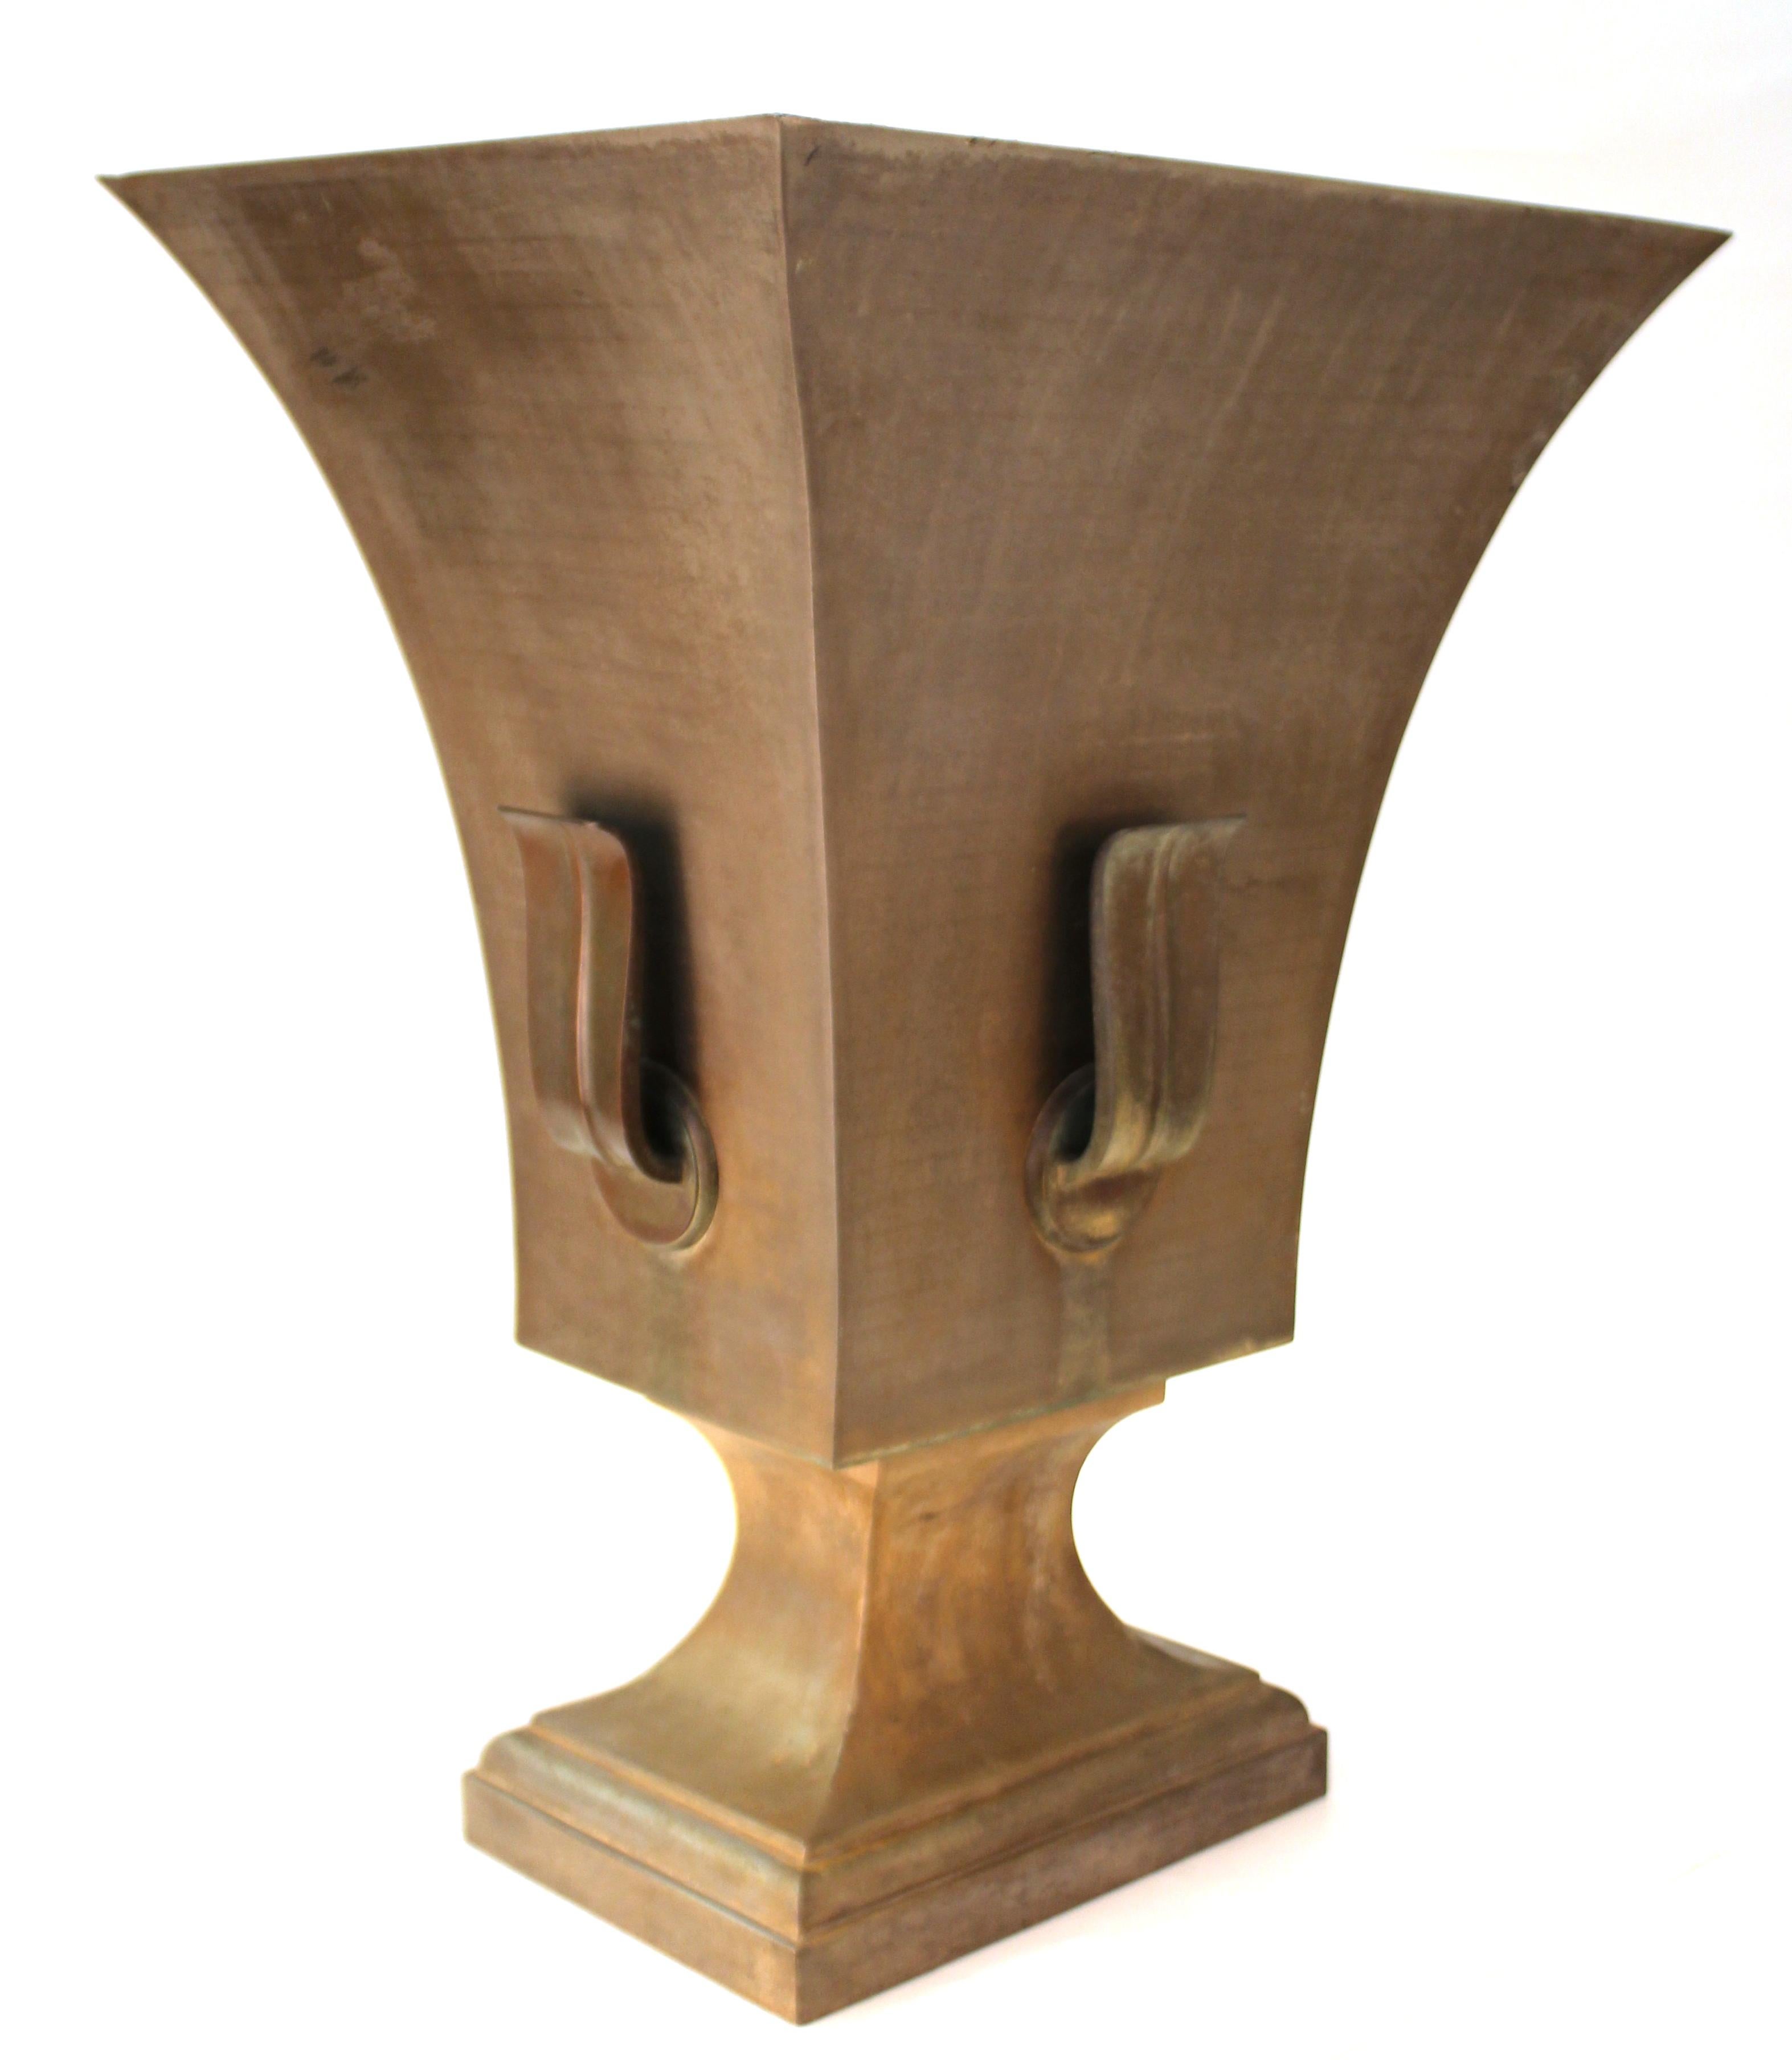 Early 20th Century American Art Deco Silvered Monumental Silvered Brass Urn-Shaped Table Base